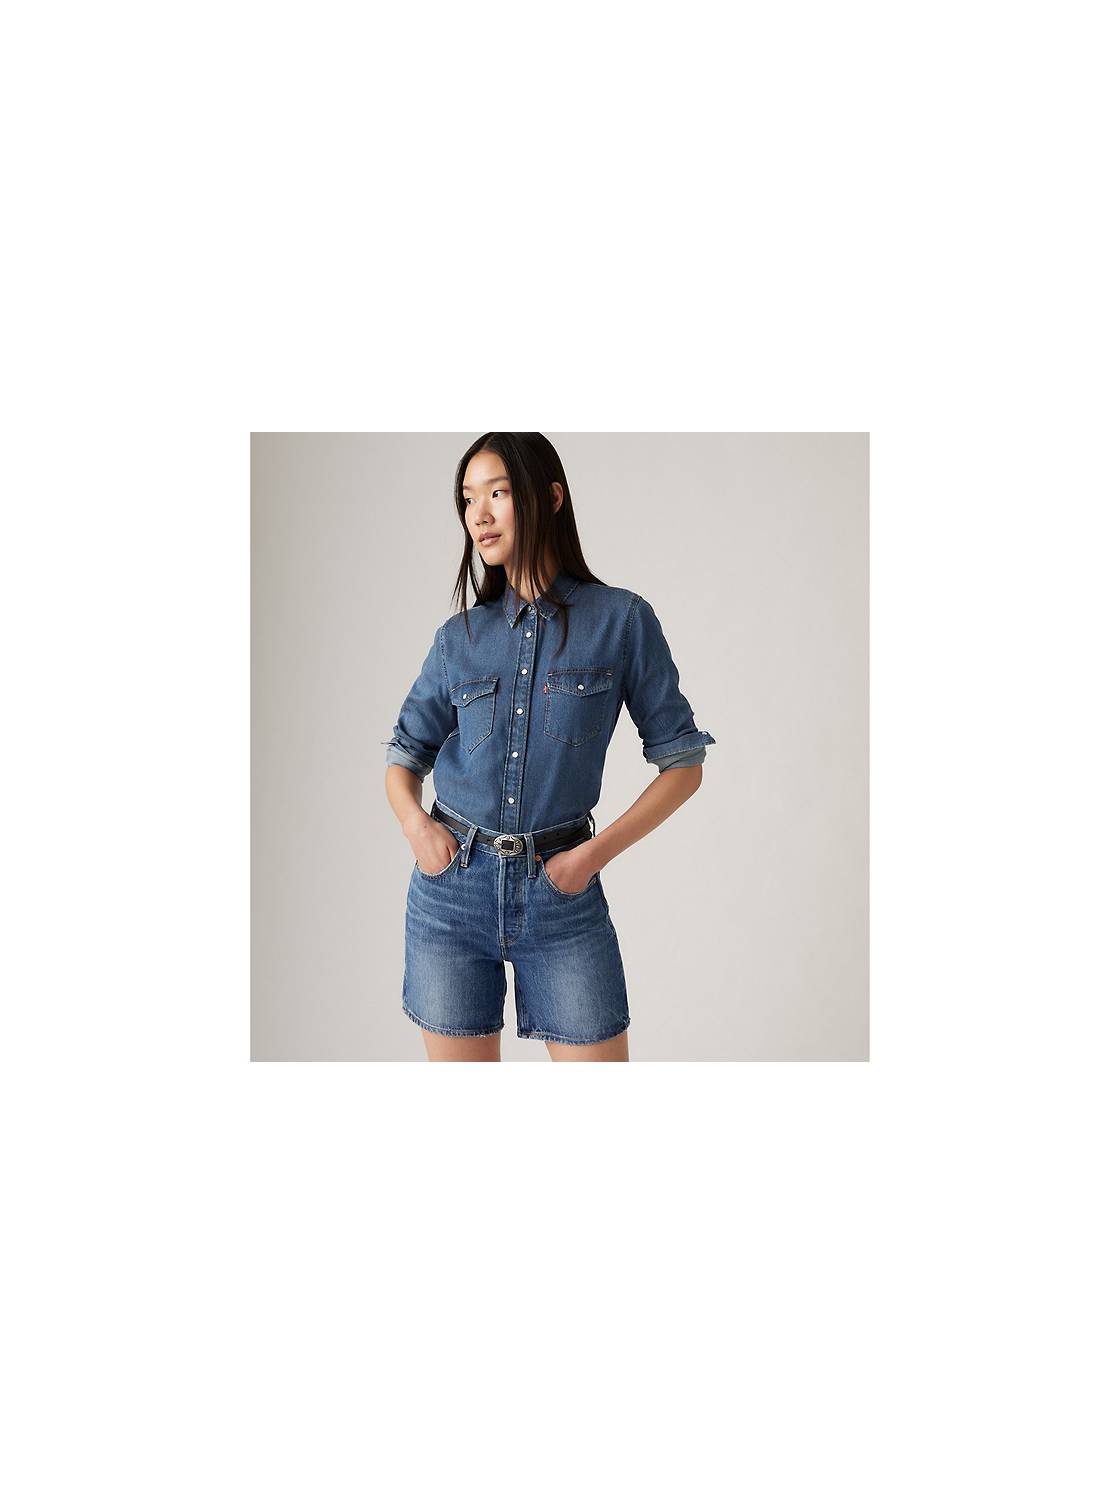 Ladies and men's #denim #shirts, #jackets and #trousers at #Lidl